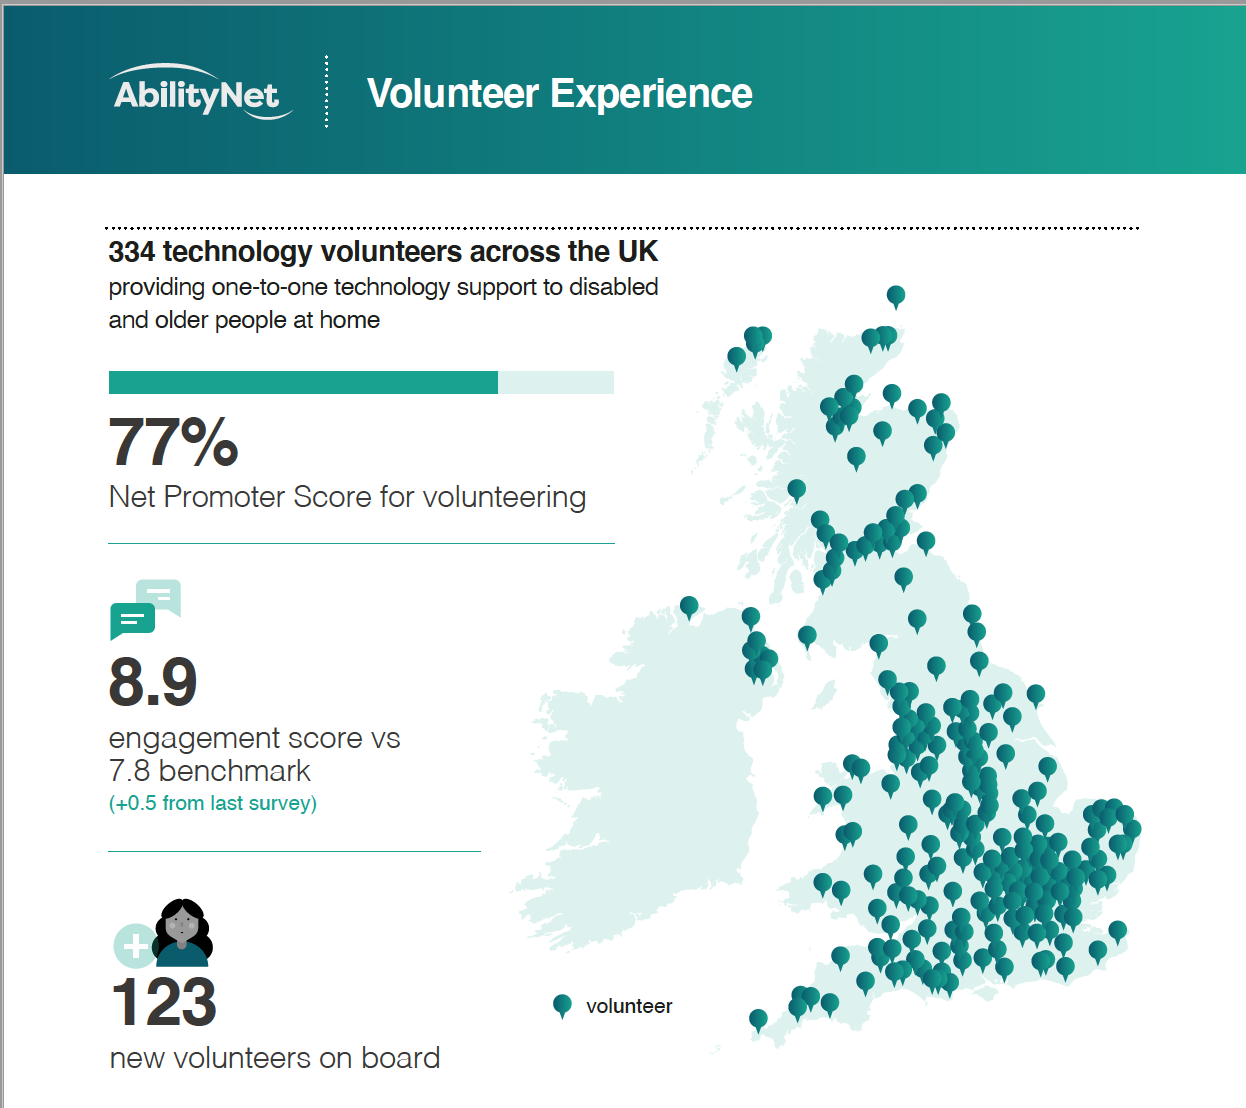 extract from AbilityNet impact report on volunteering